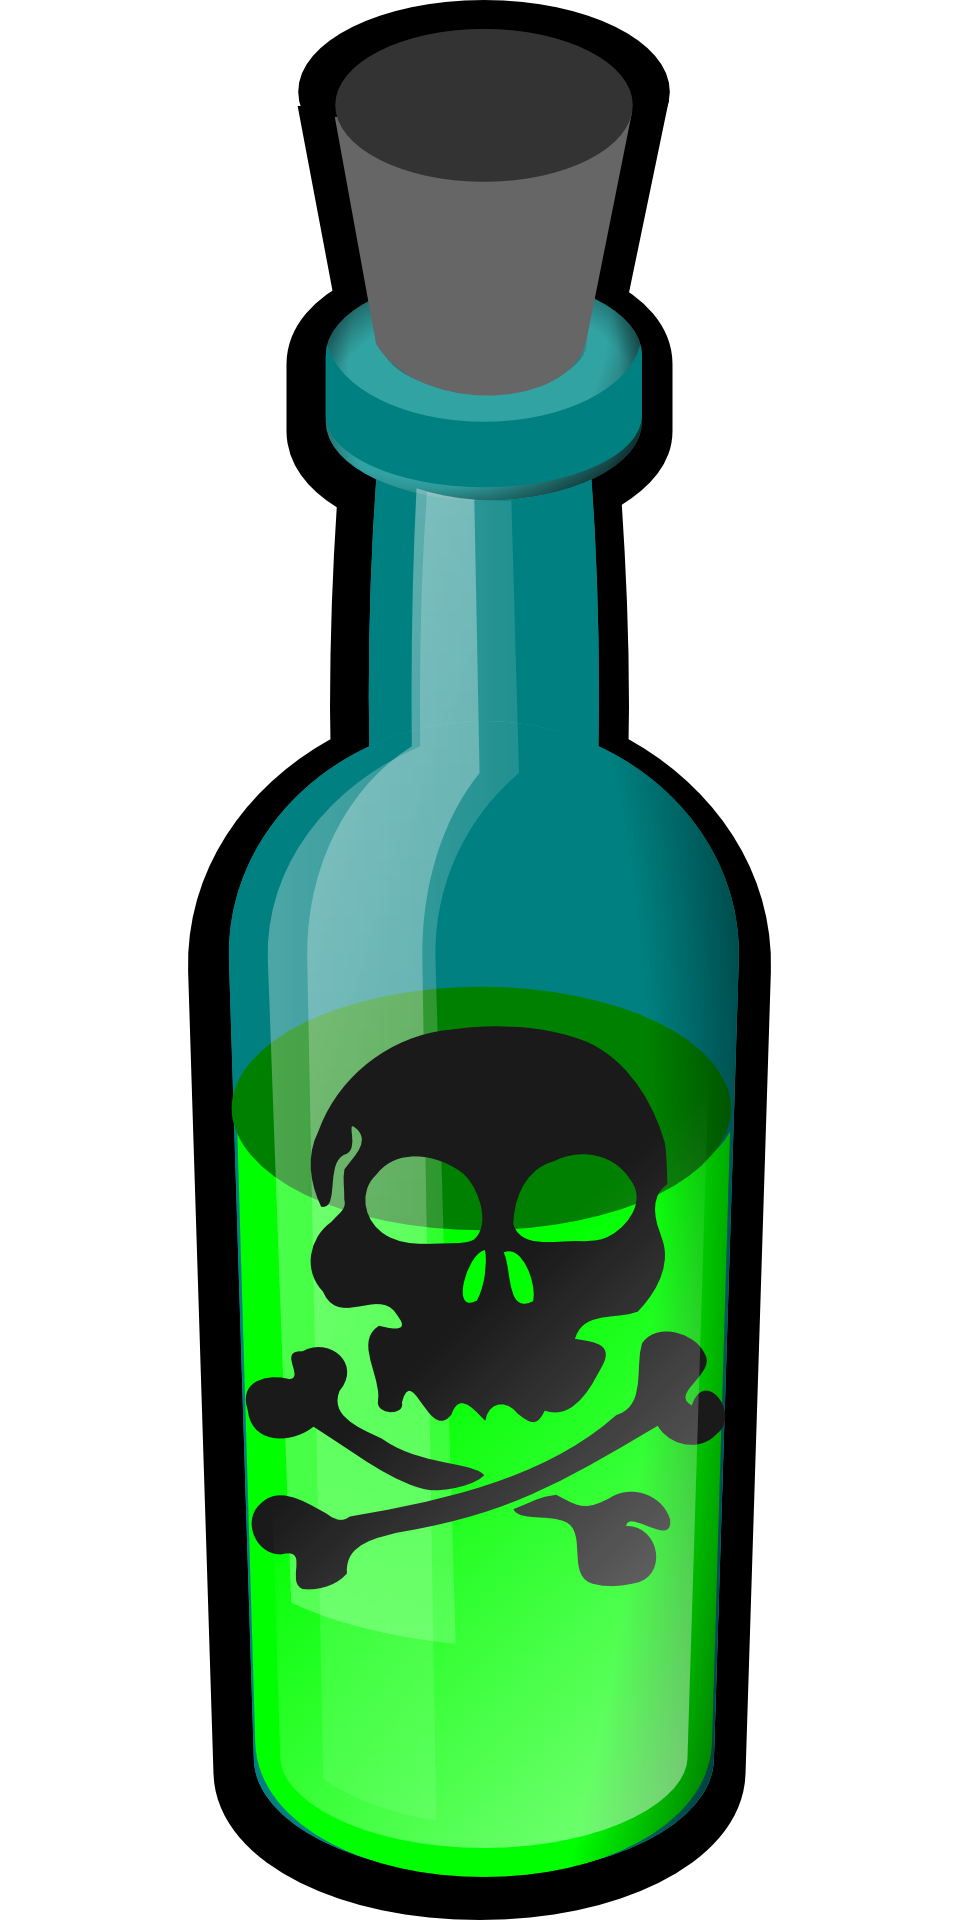 Bottle of toxic poison drawing free image download